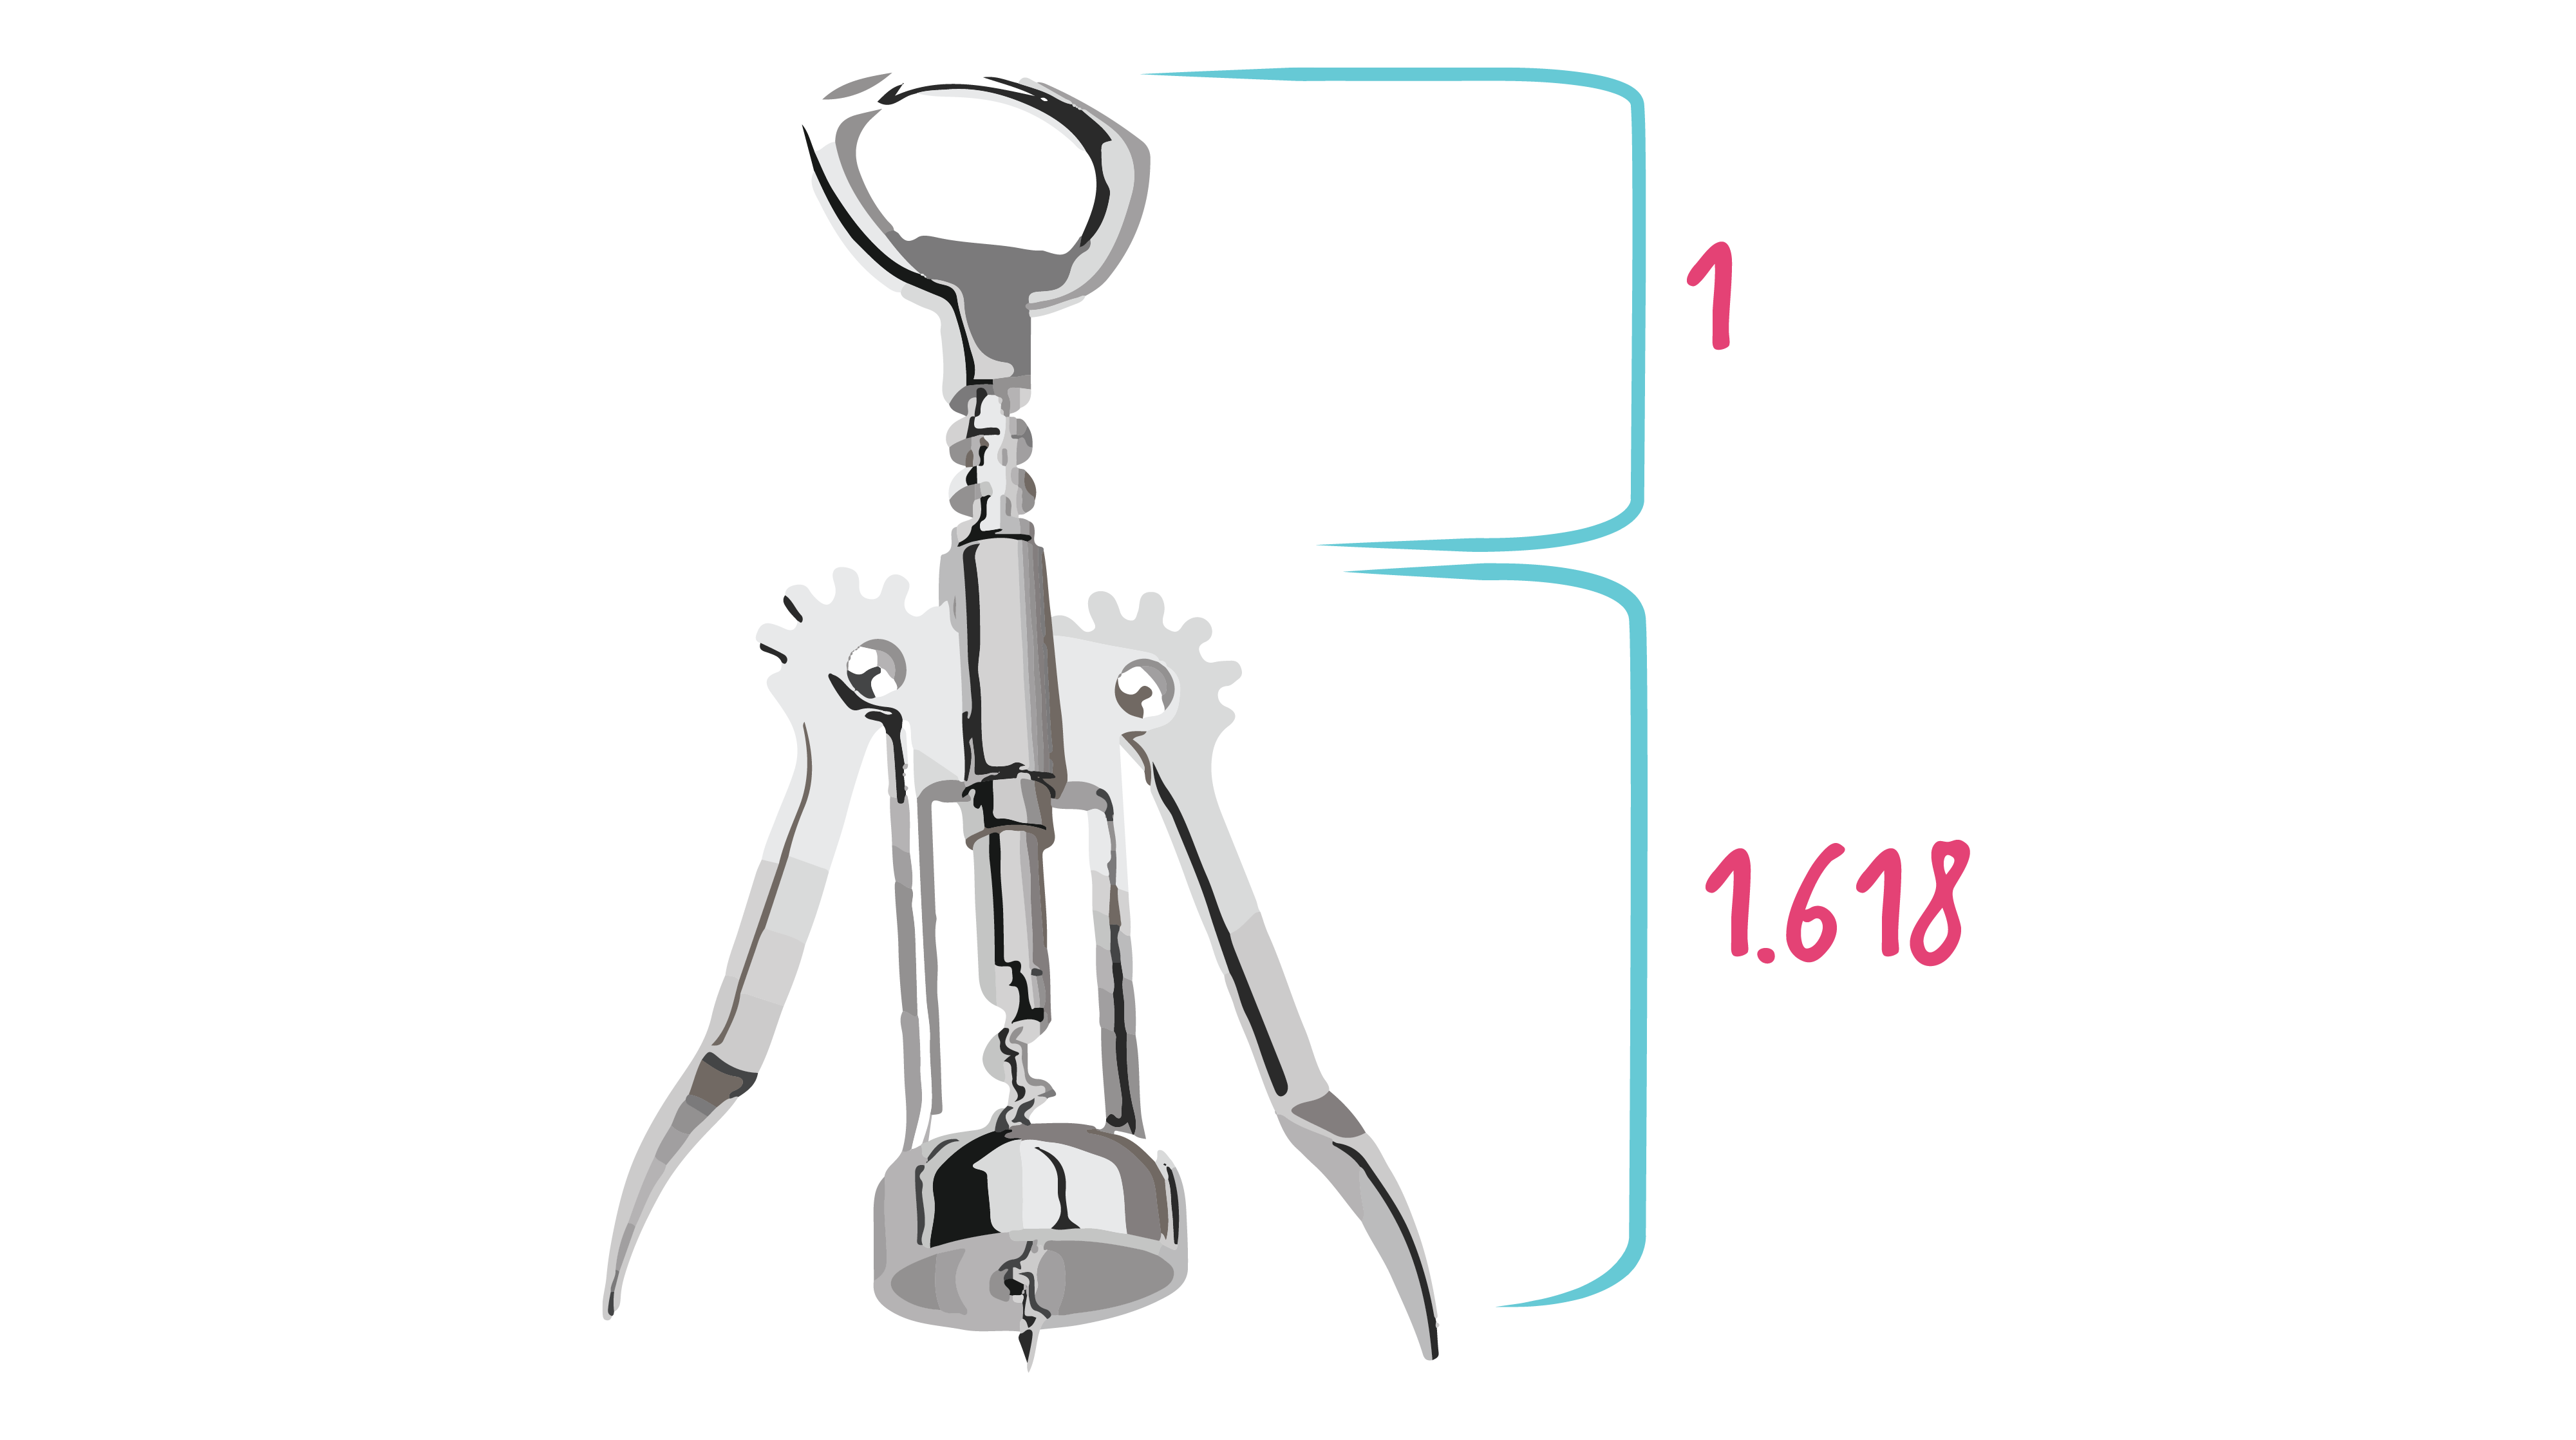 A silver corkscrew is shown next to two lines, illustrating its proportions of a ratio of 1 to 1.618.